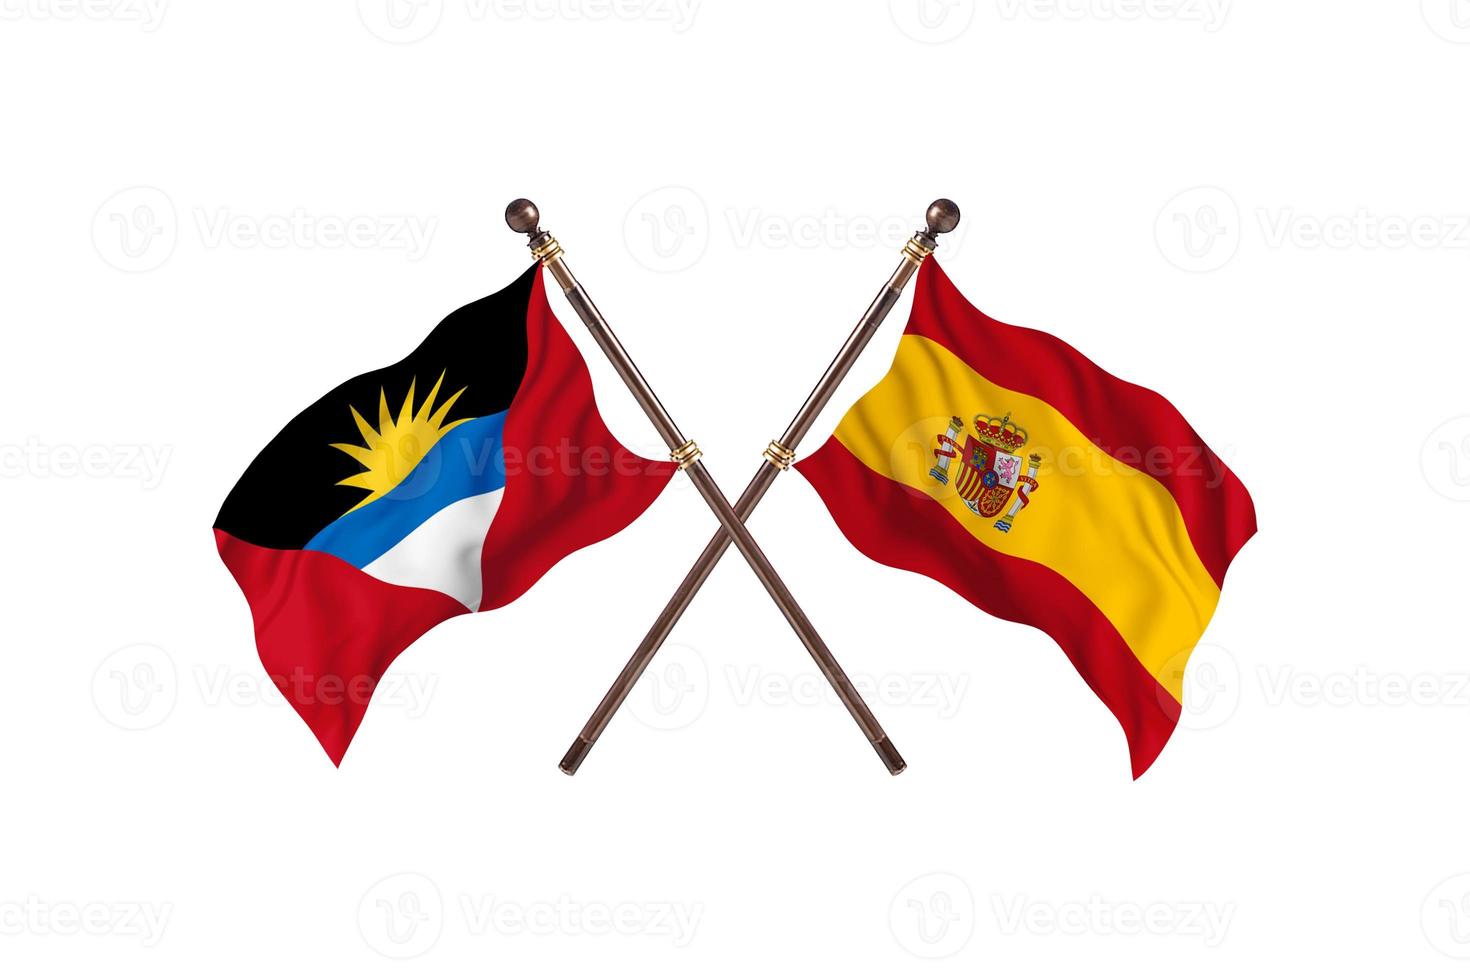 Antigua and Barbuda versus Spain Two Country Flags photo